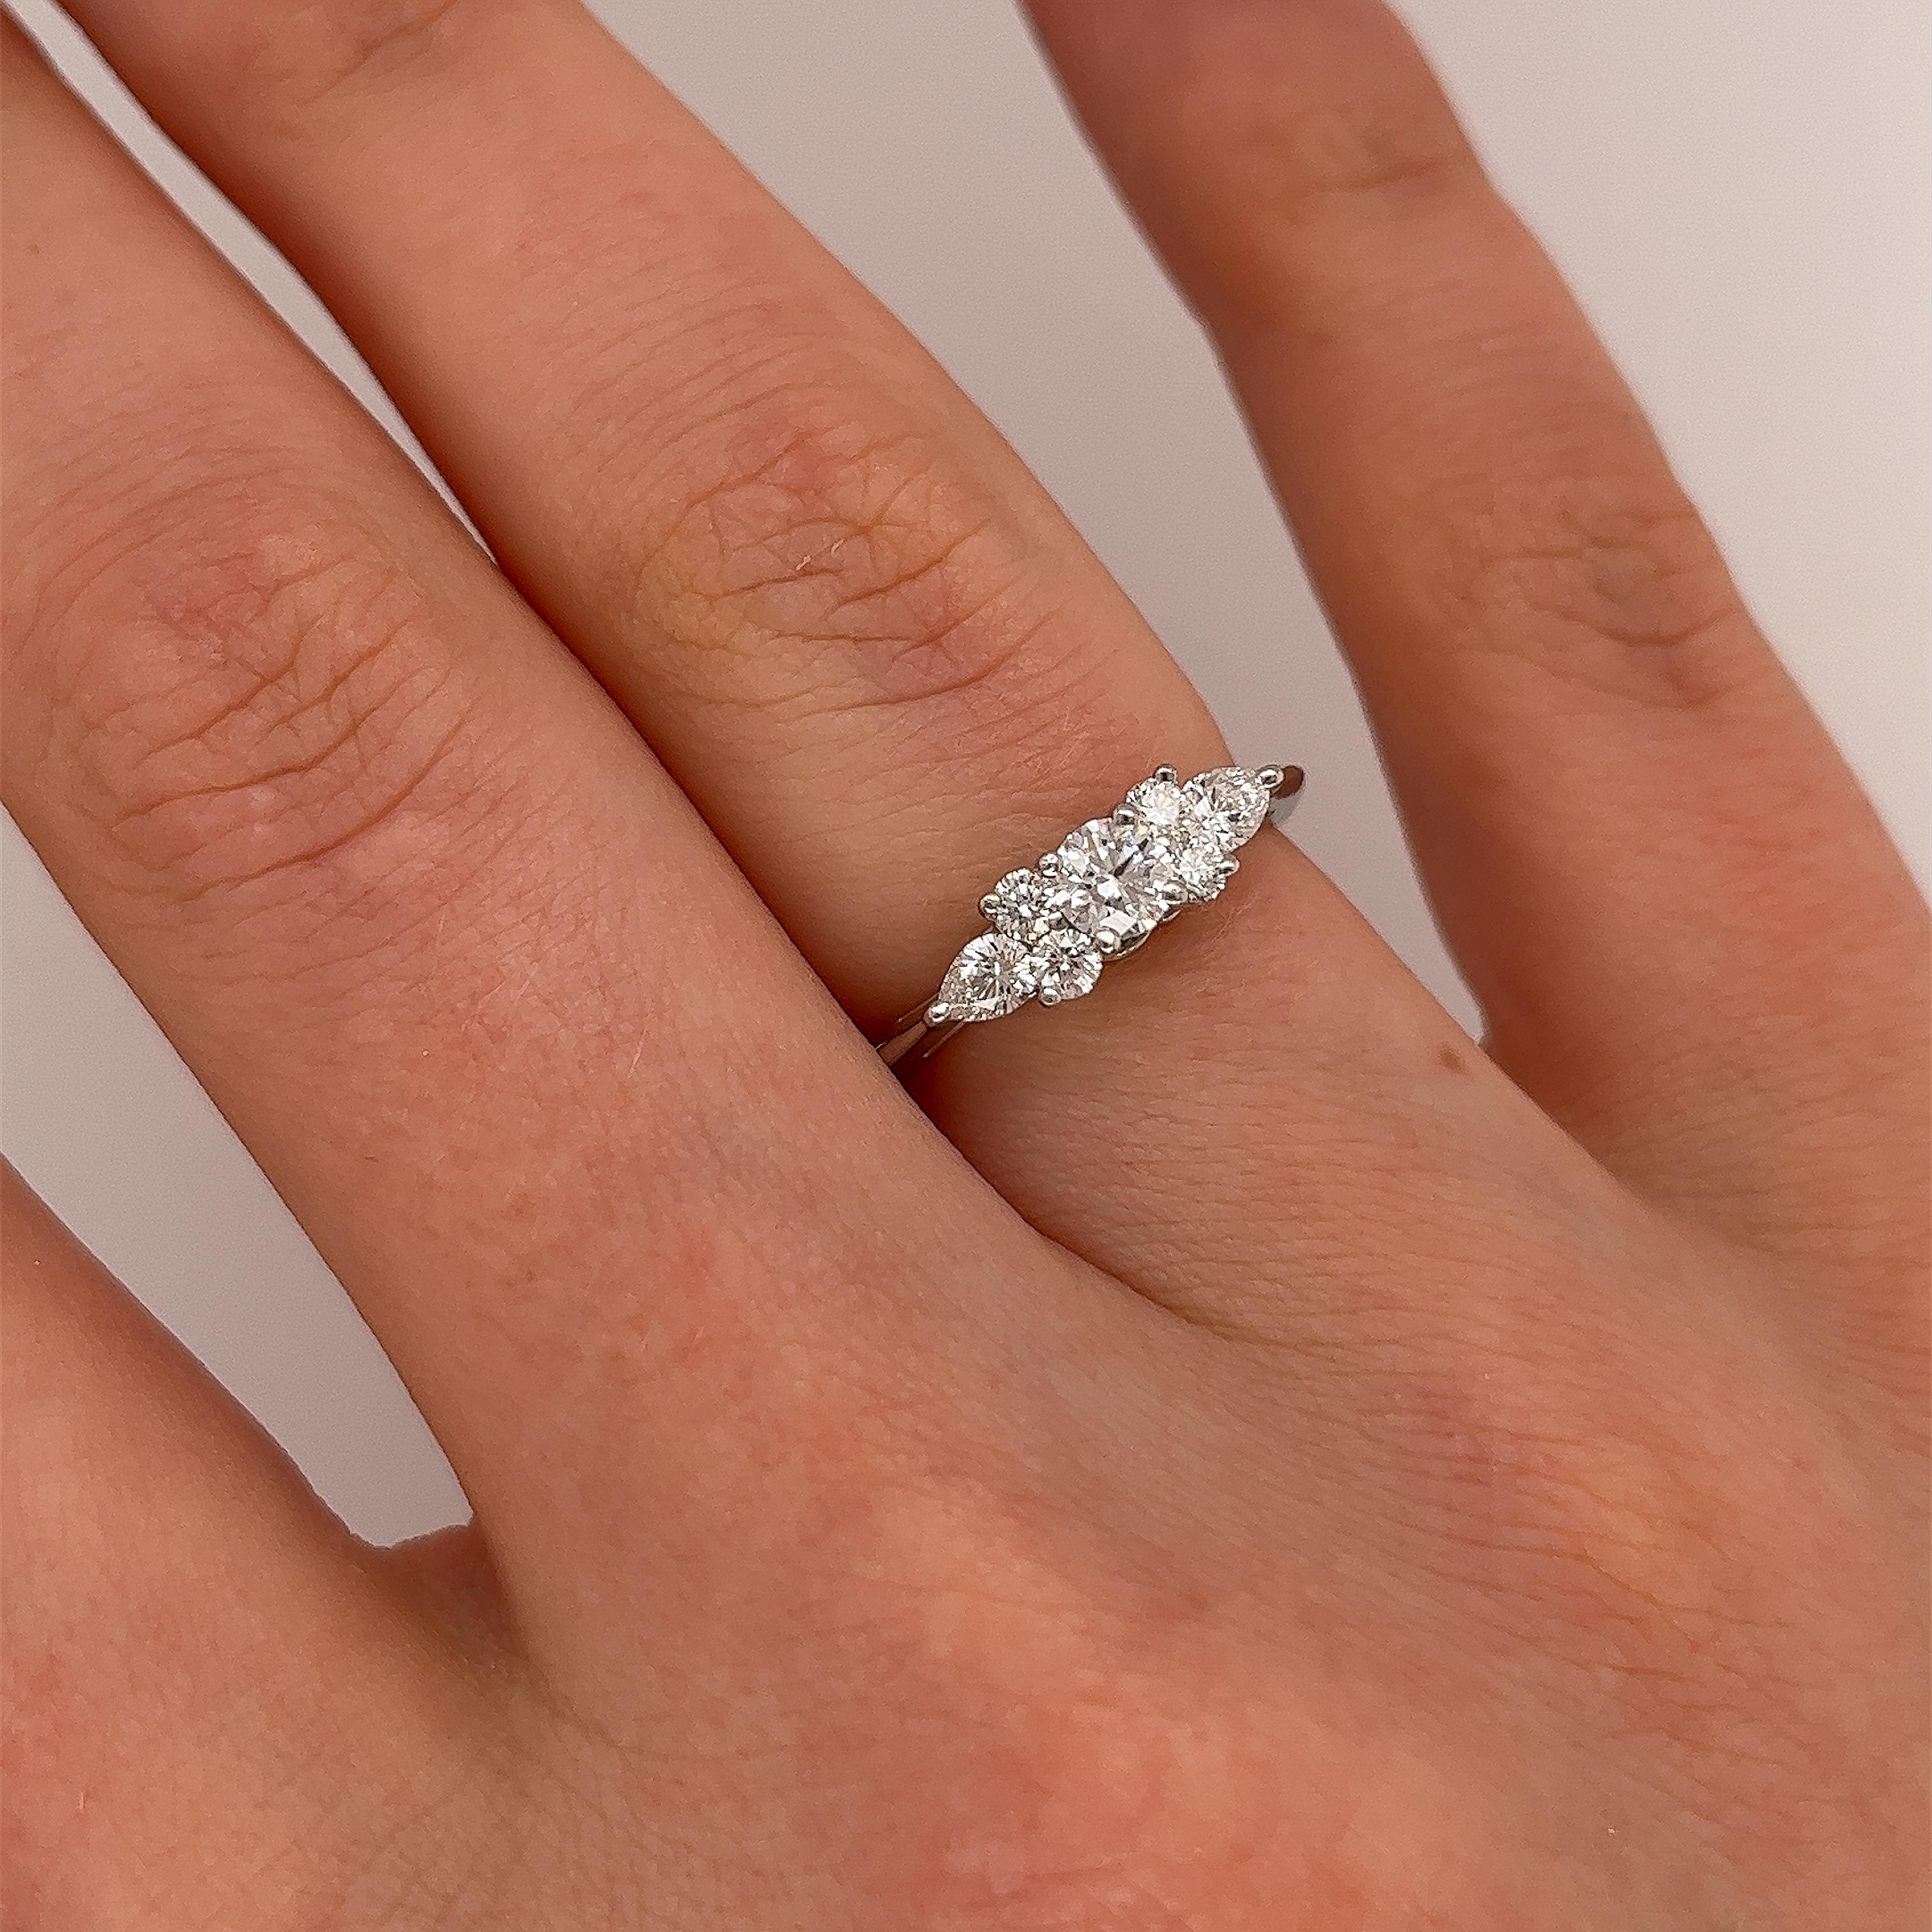 Tiffany & Co. Diamond Platinum Seven Stone Ring is a breathtaking piece with a captivating design. 
This ring features seven exquisite diamonds set in platinum, creating a stunning display of brilliance and elegance. The arrangement typically